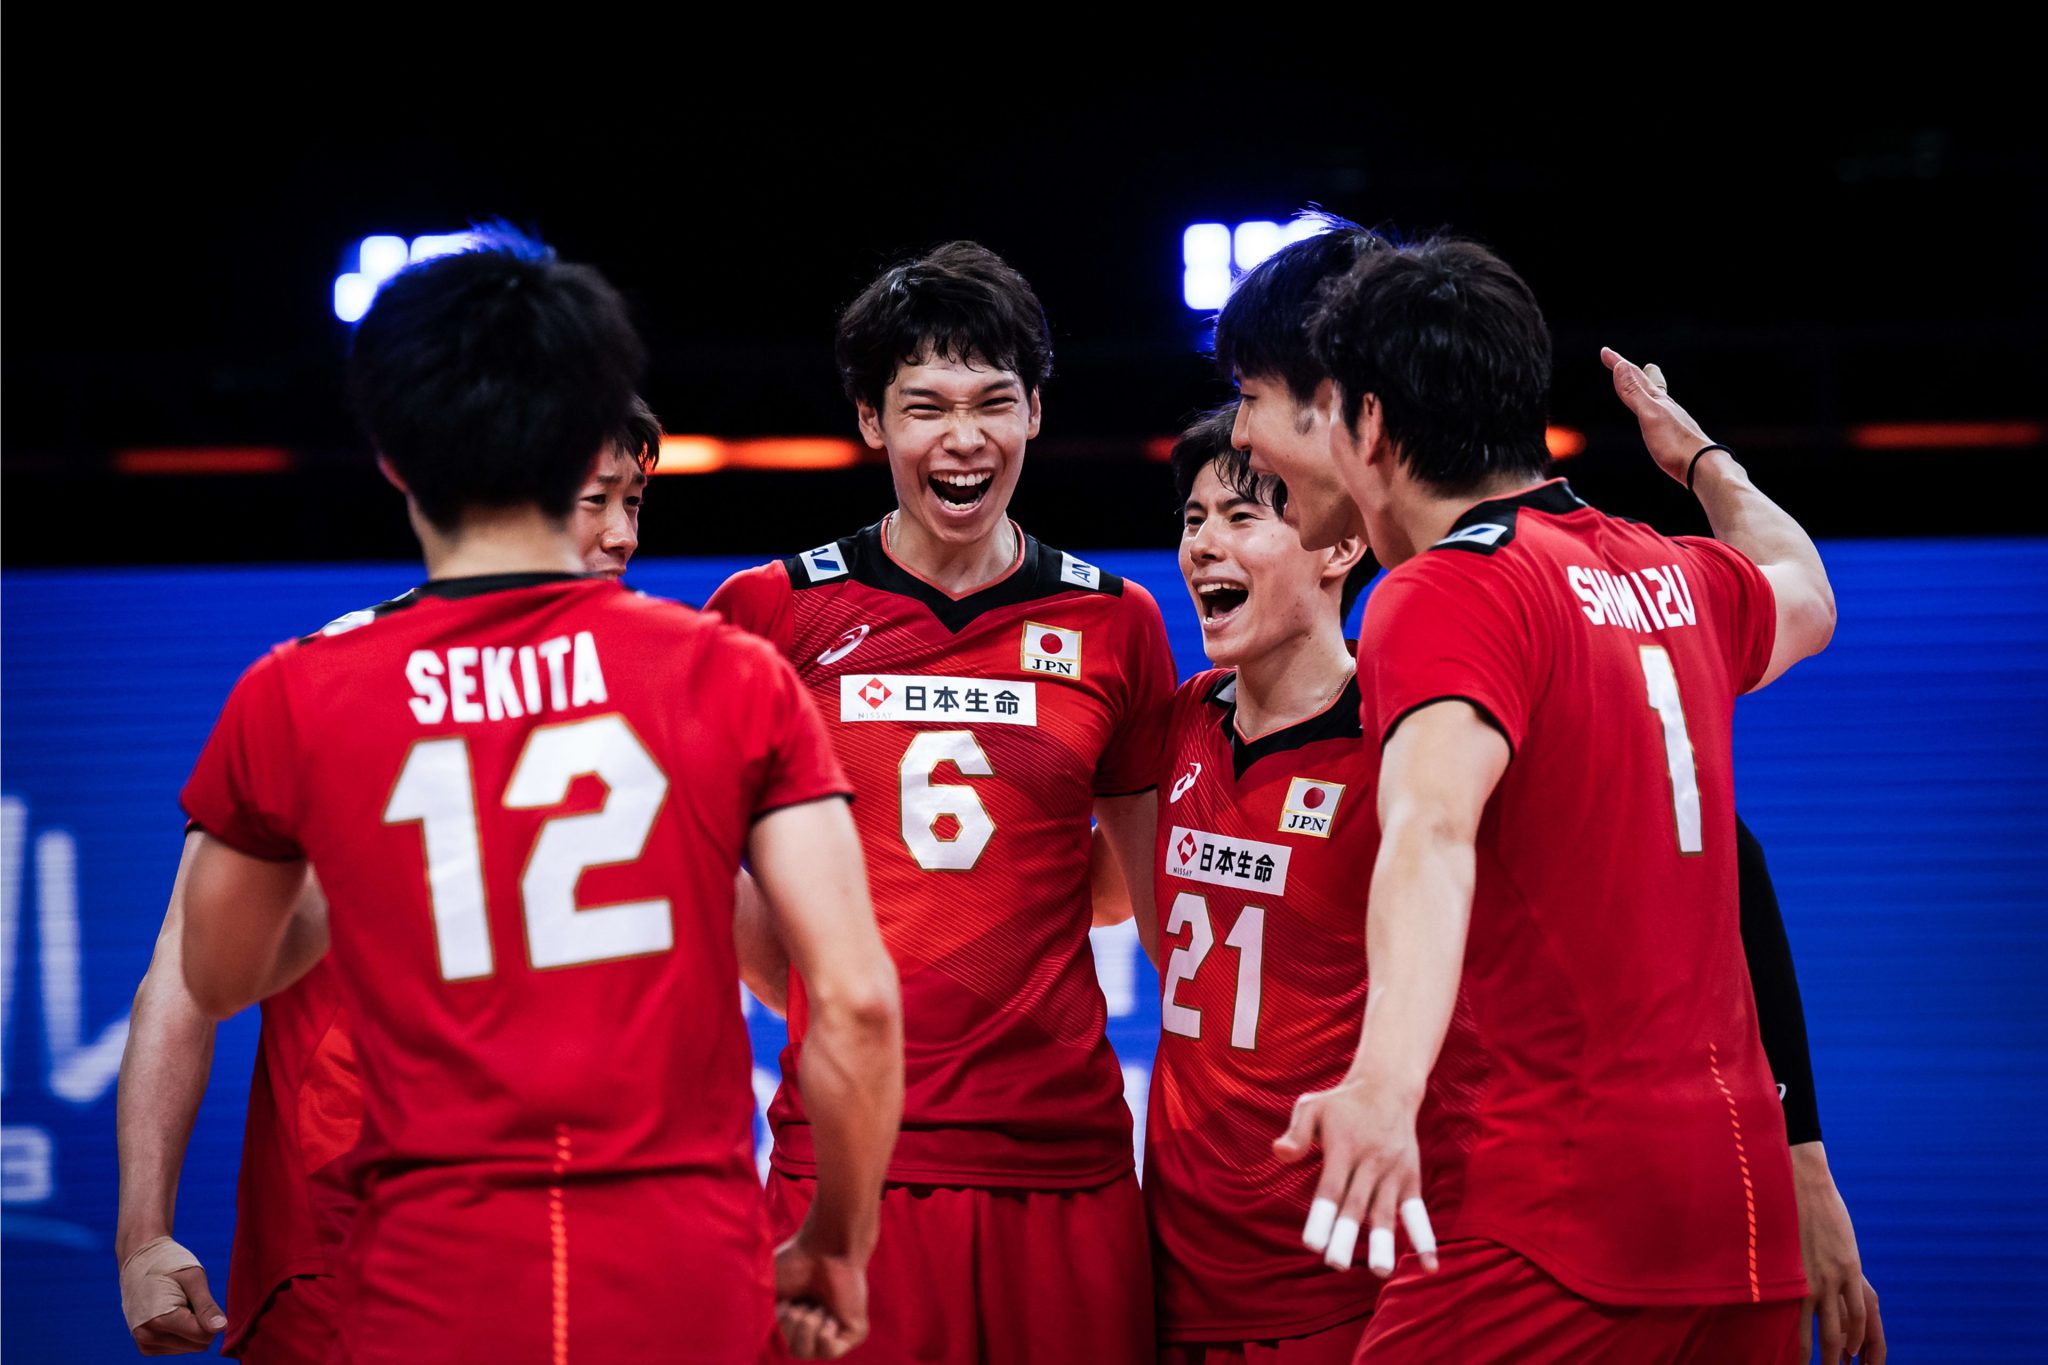 JAPAN NOTCH 6TH WIN IN 2021 VNL AFTER CONVINCING VICTORY OVER GERMANY ...